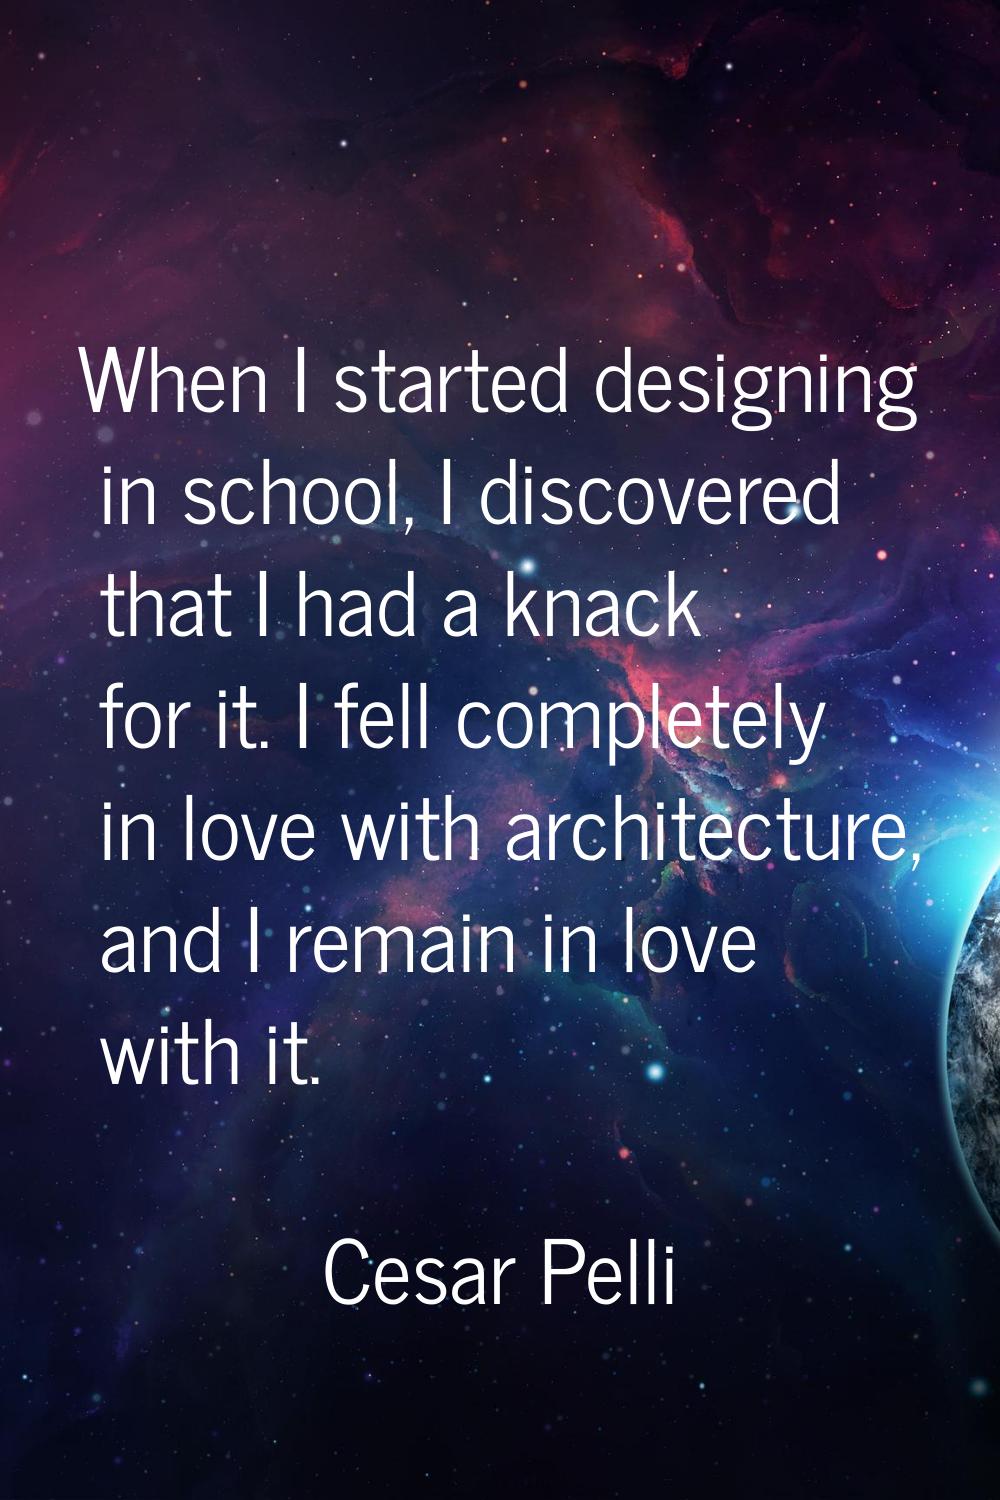 When I started designing in school, I discovered that I had a knack for it. I fell completely in lo